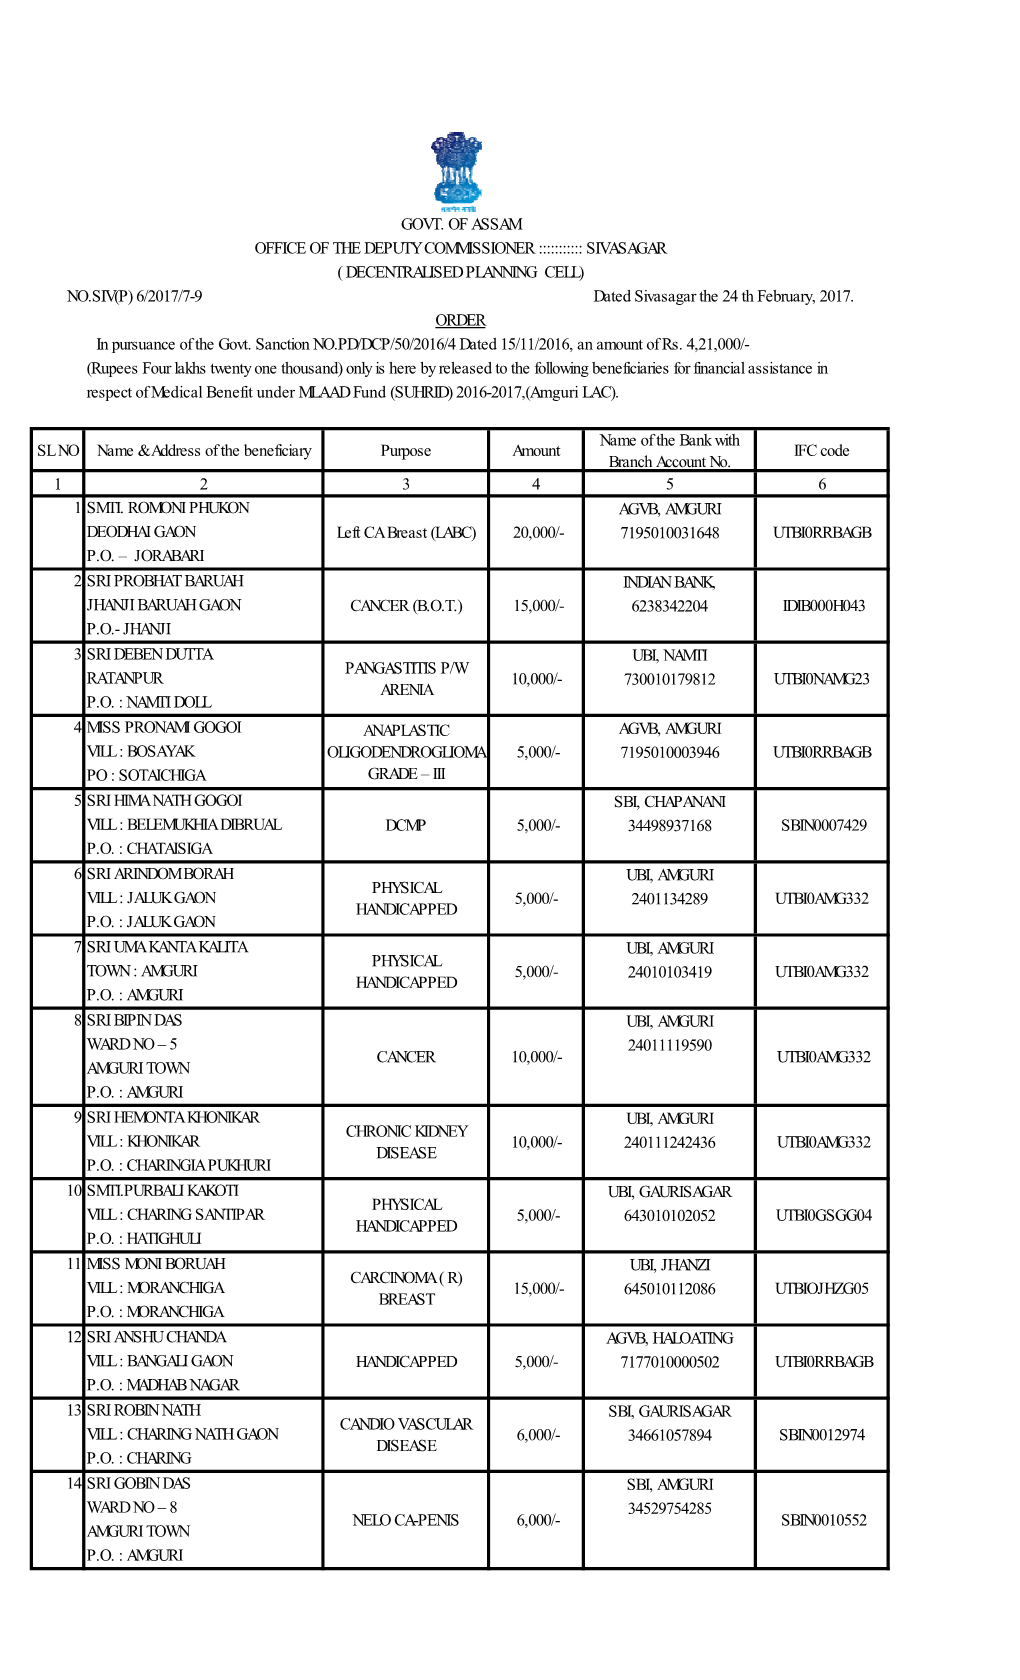 Only Is Here by Released to the Following Beneficiaries for Financial Assistance in Respect of Medical Benefit Under MLAAD Fund (SUHRID) 2016-2017,(Amguri LAC)